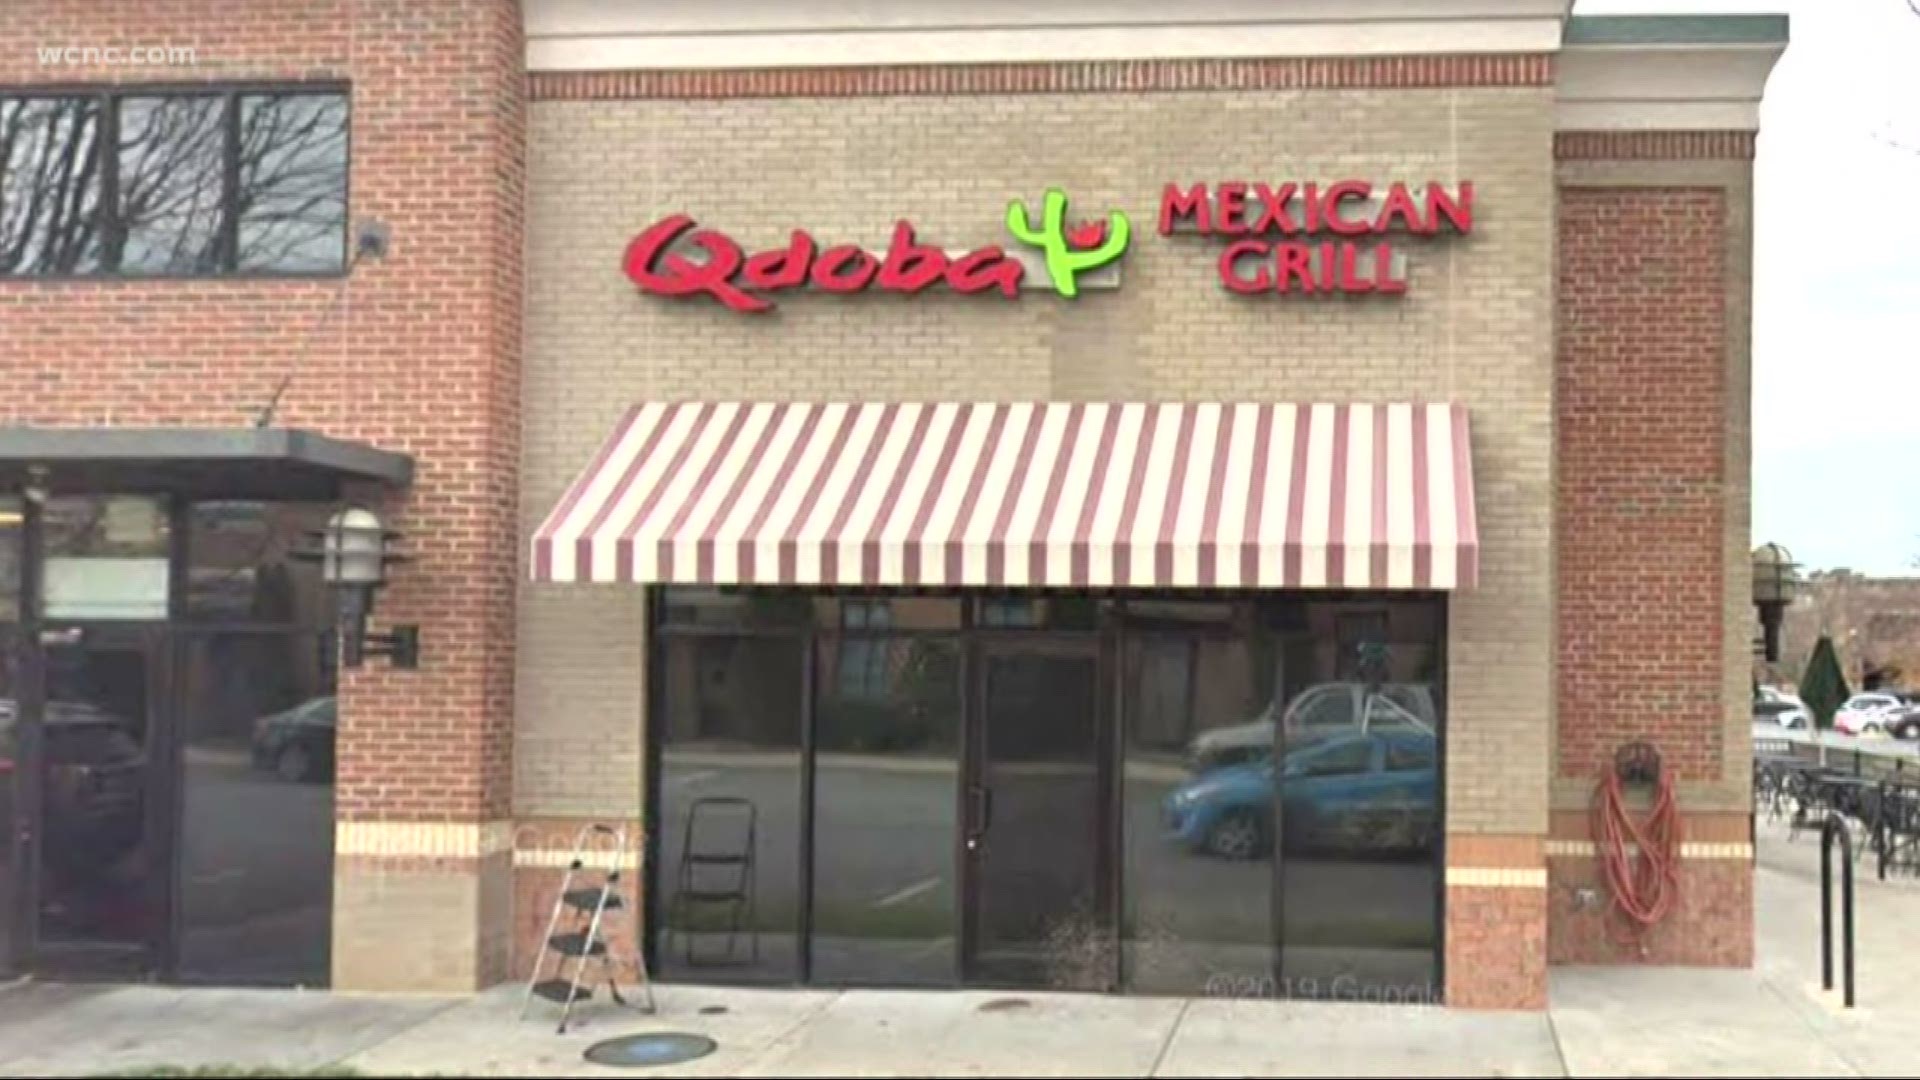 A worker at a Qdoba in Matthews was seen taking out garbage before handling food. And they didn't wash their hands.